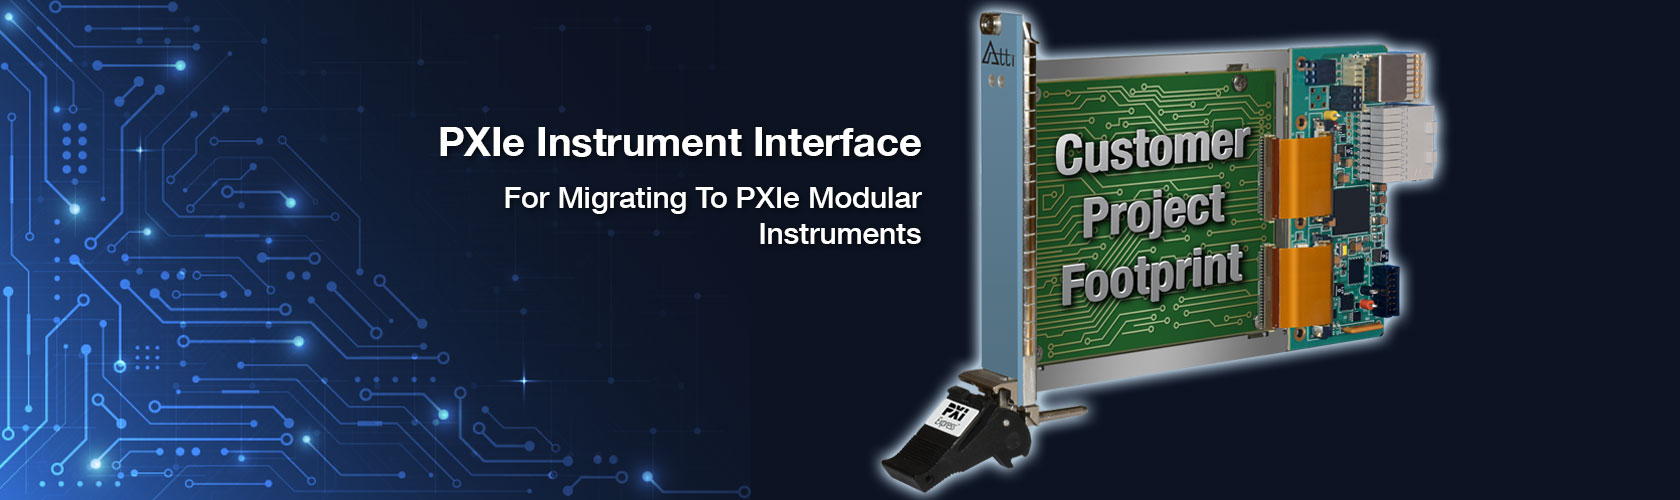 PXIe Instrument Interface